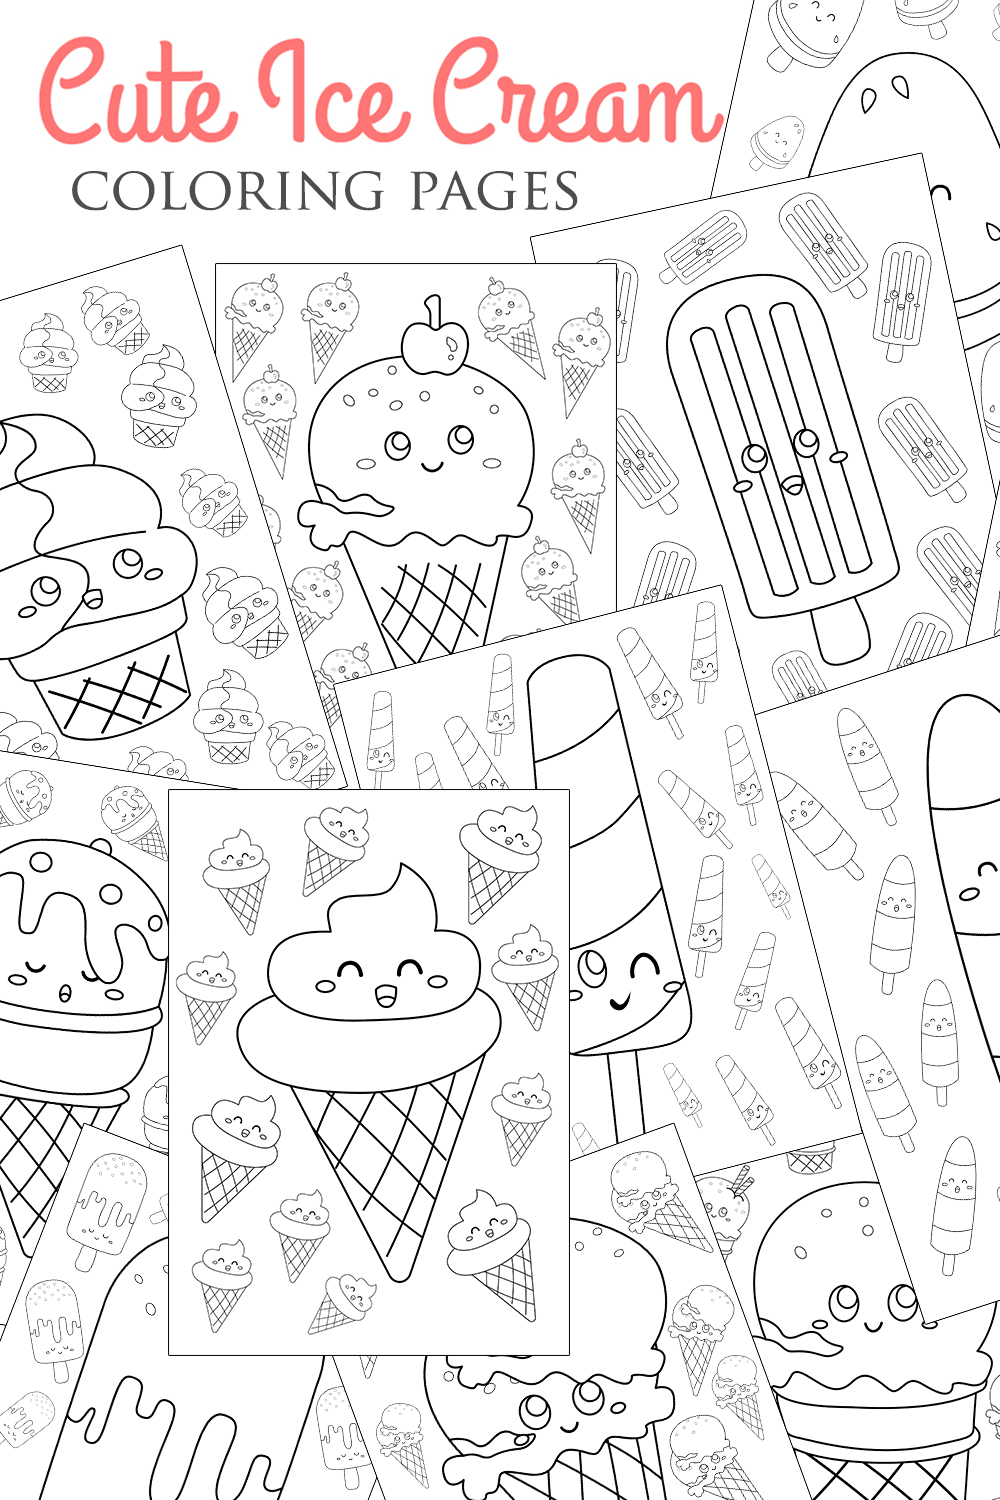 Cute Ice Cream Dessert Flavor Snack Cone Scoop Fruit Chocolate Strawberry Cup Sprinkle Doodle Funny Coloring for Kids and Adult Cartoon pinterest preview image.